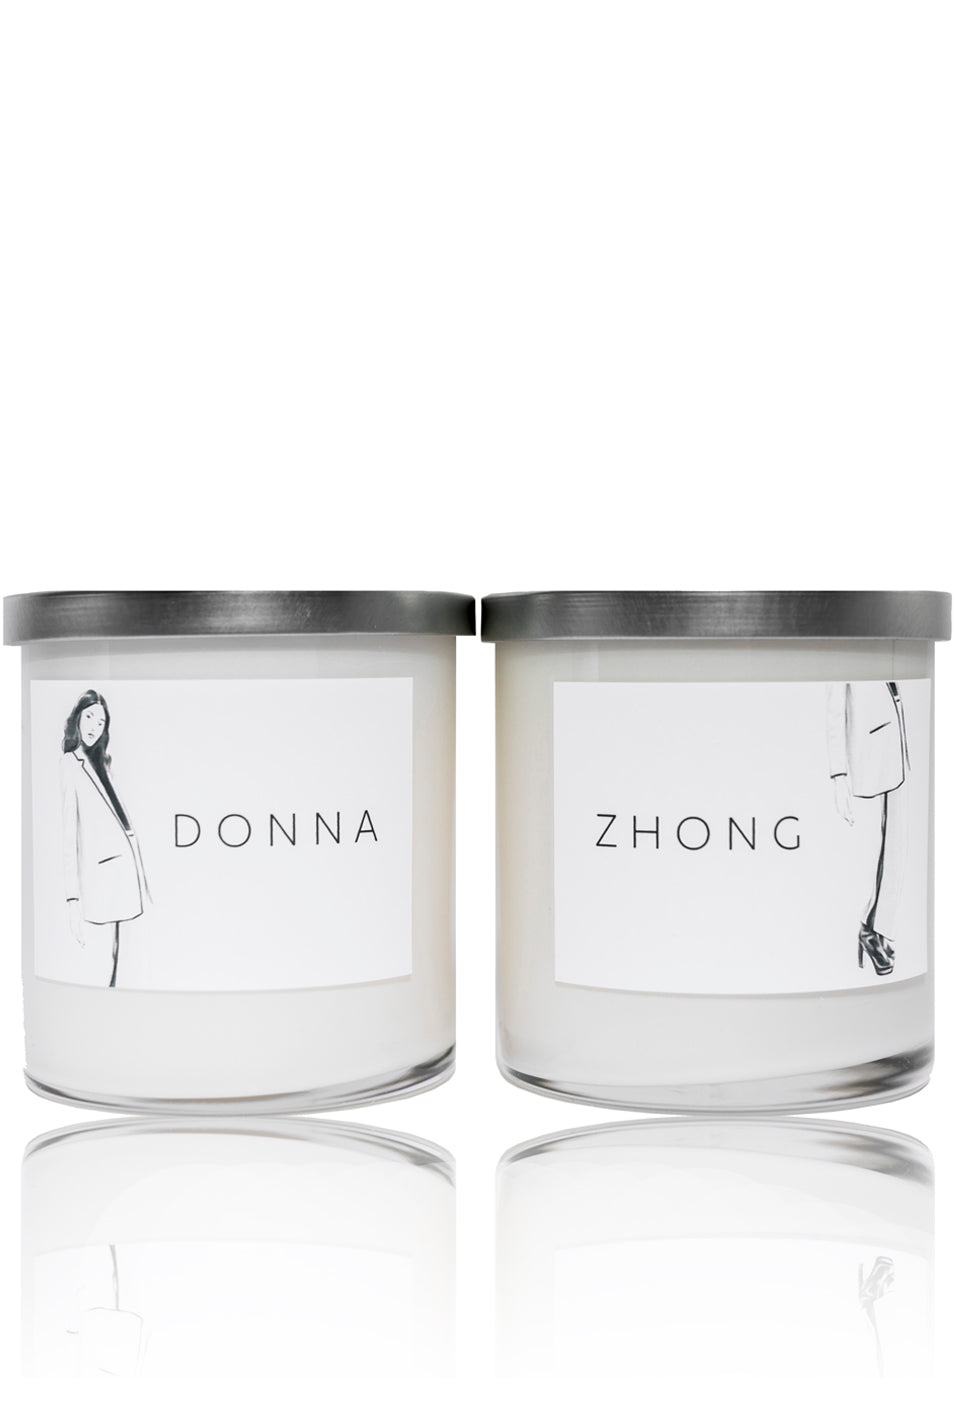 The "Zhong" Candle - 2s-twoways